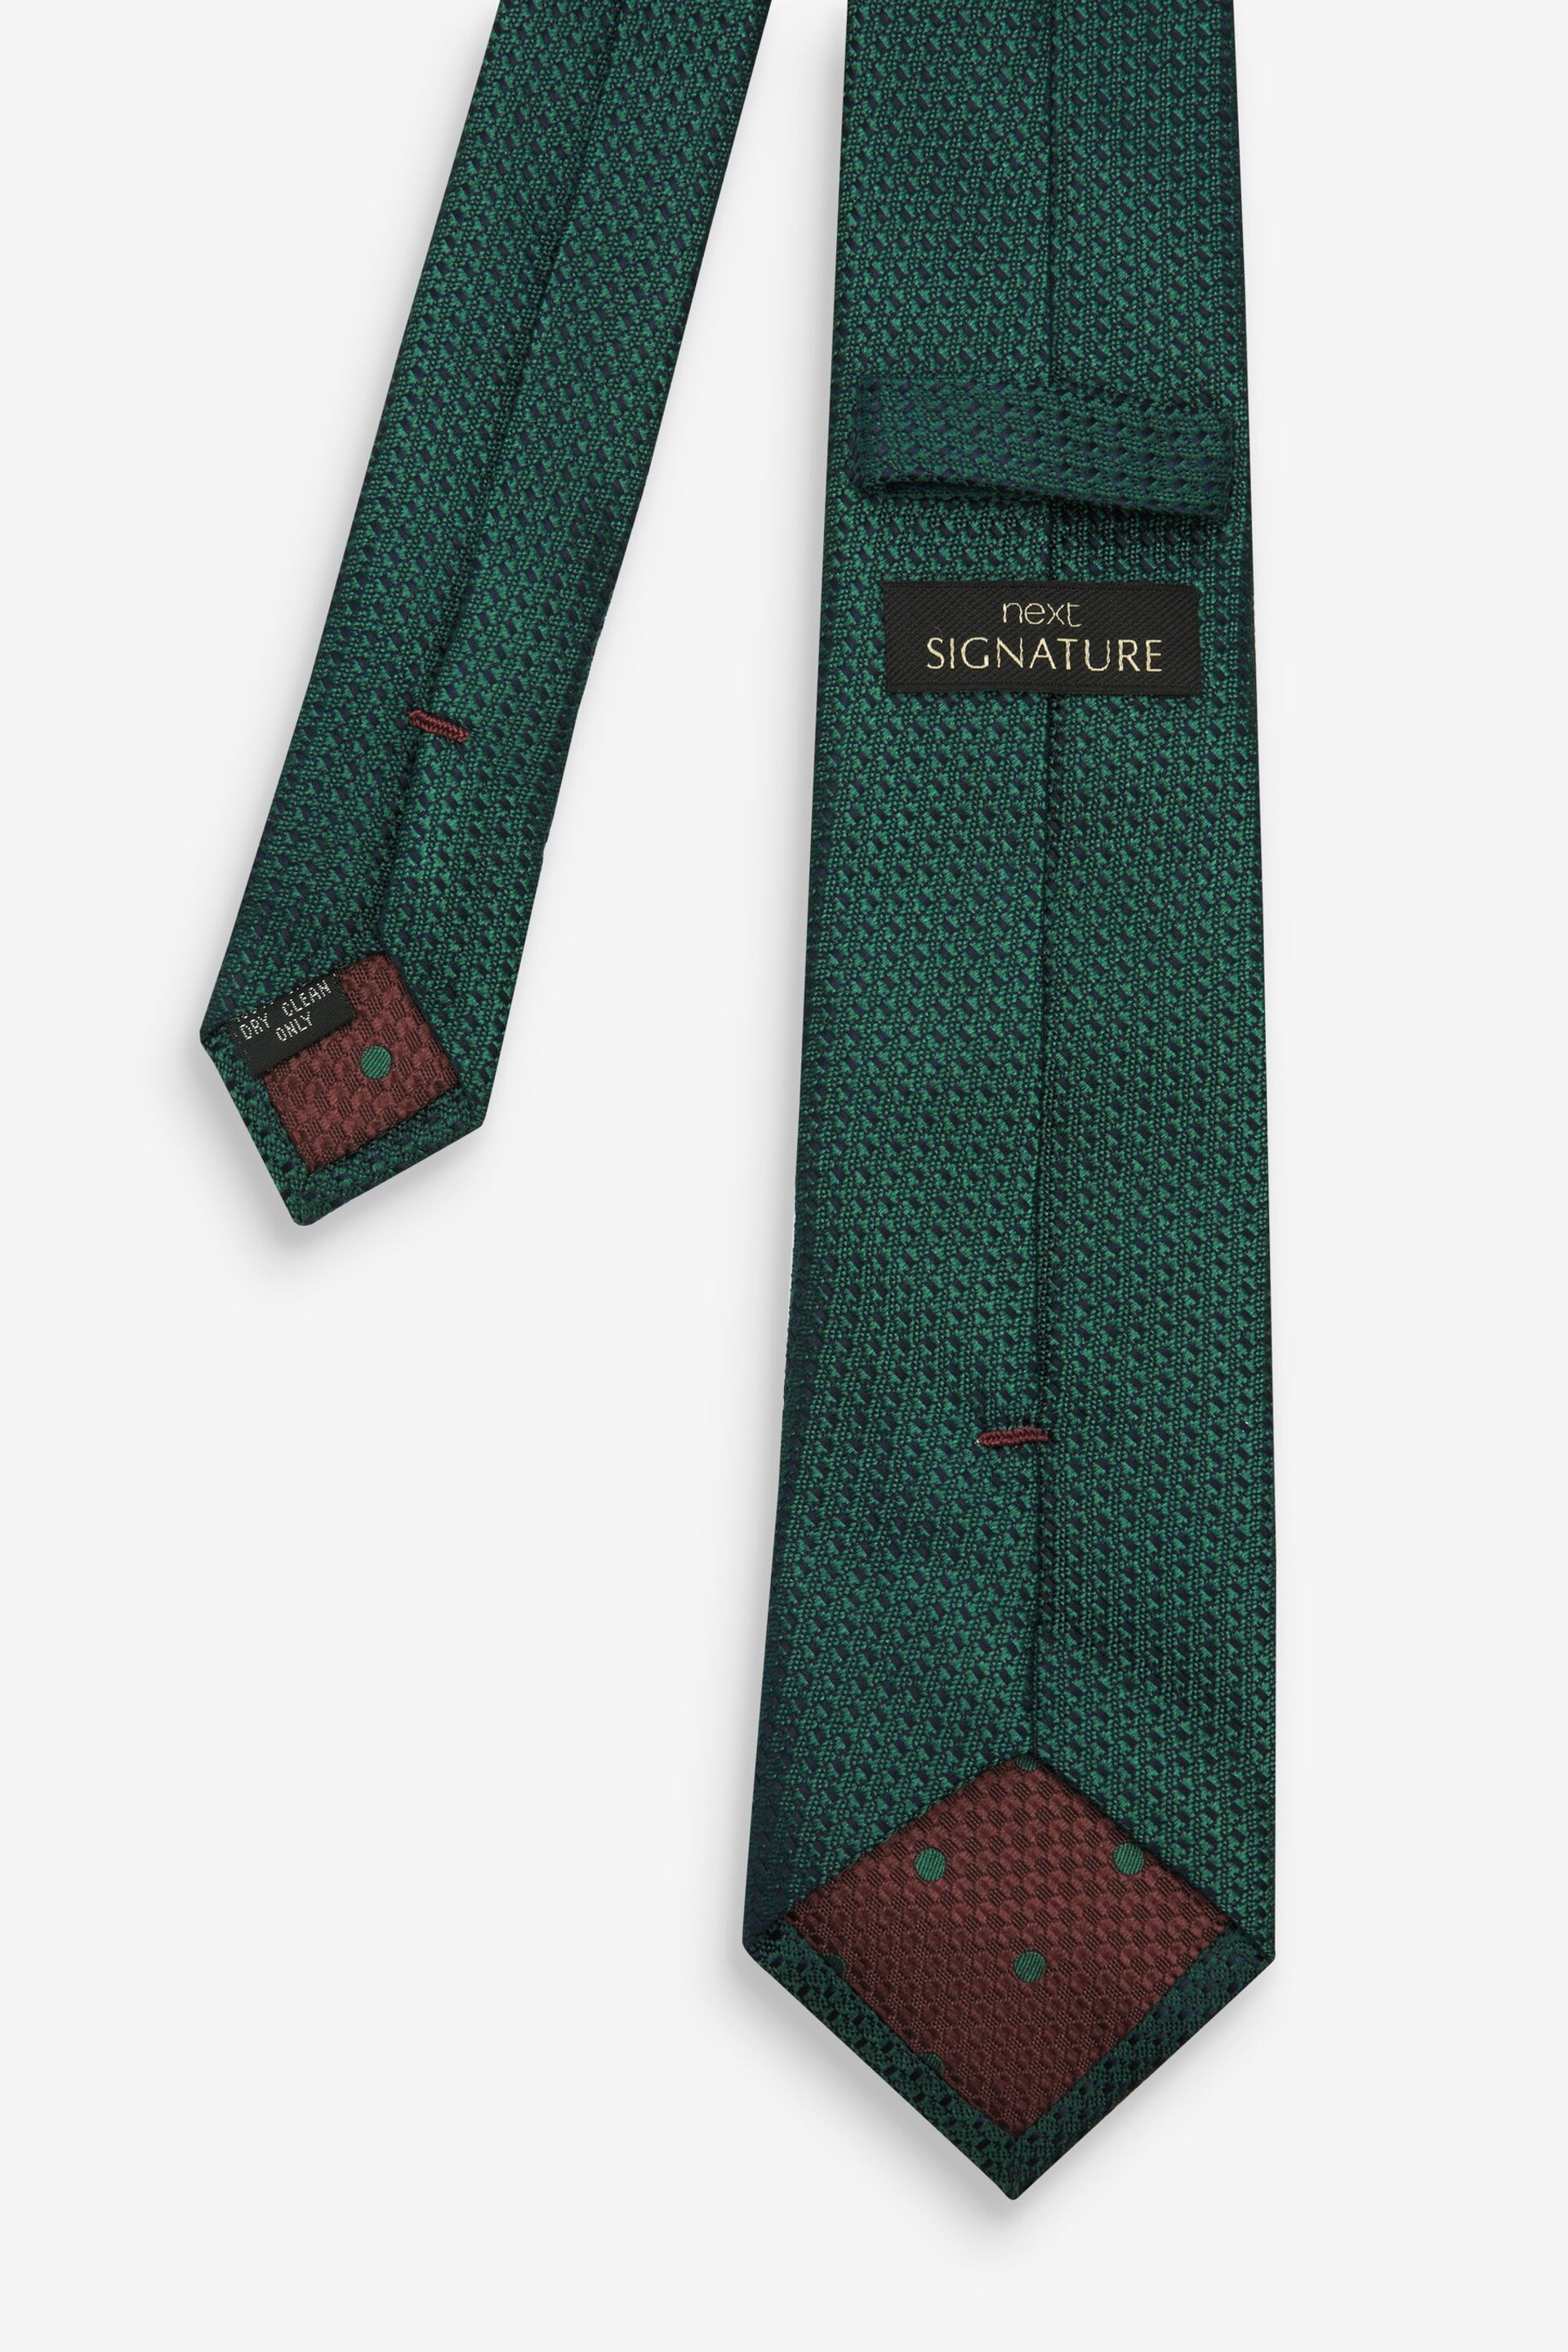 Forest Green Textured Silk Tie - Image 2 of 3